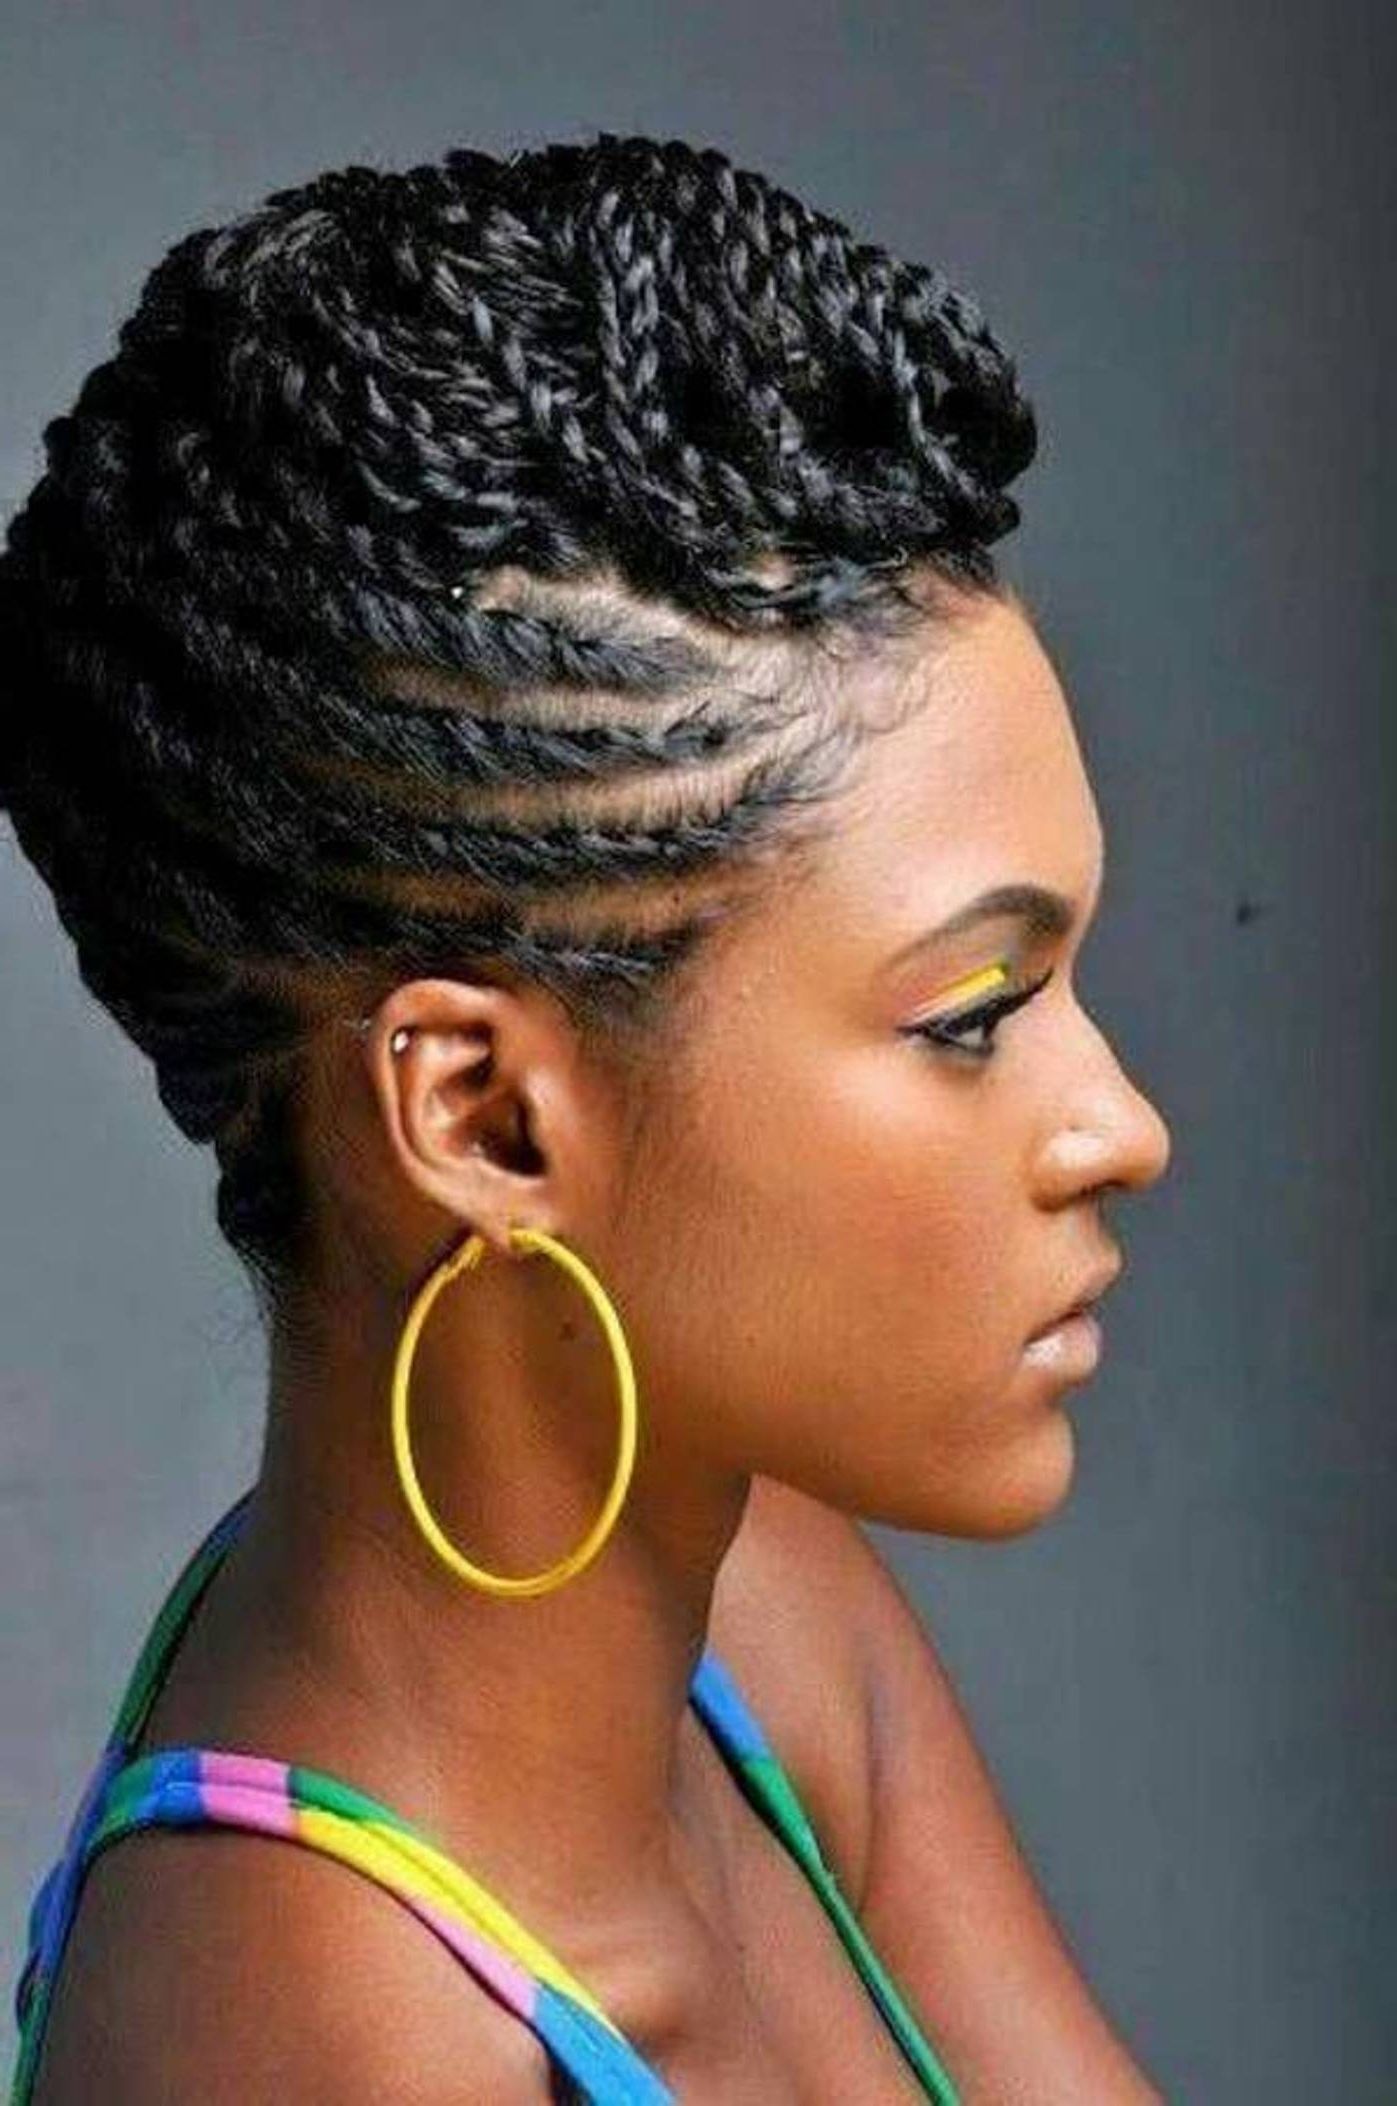 25 Updo Hairstyles For Black Women Inside Quick Updo Hairstyles For Natural Black Hair (View 4 of 15)